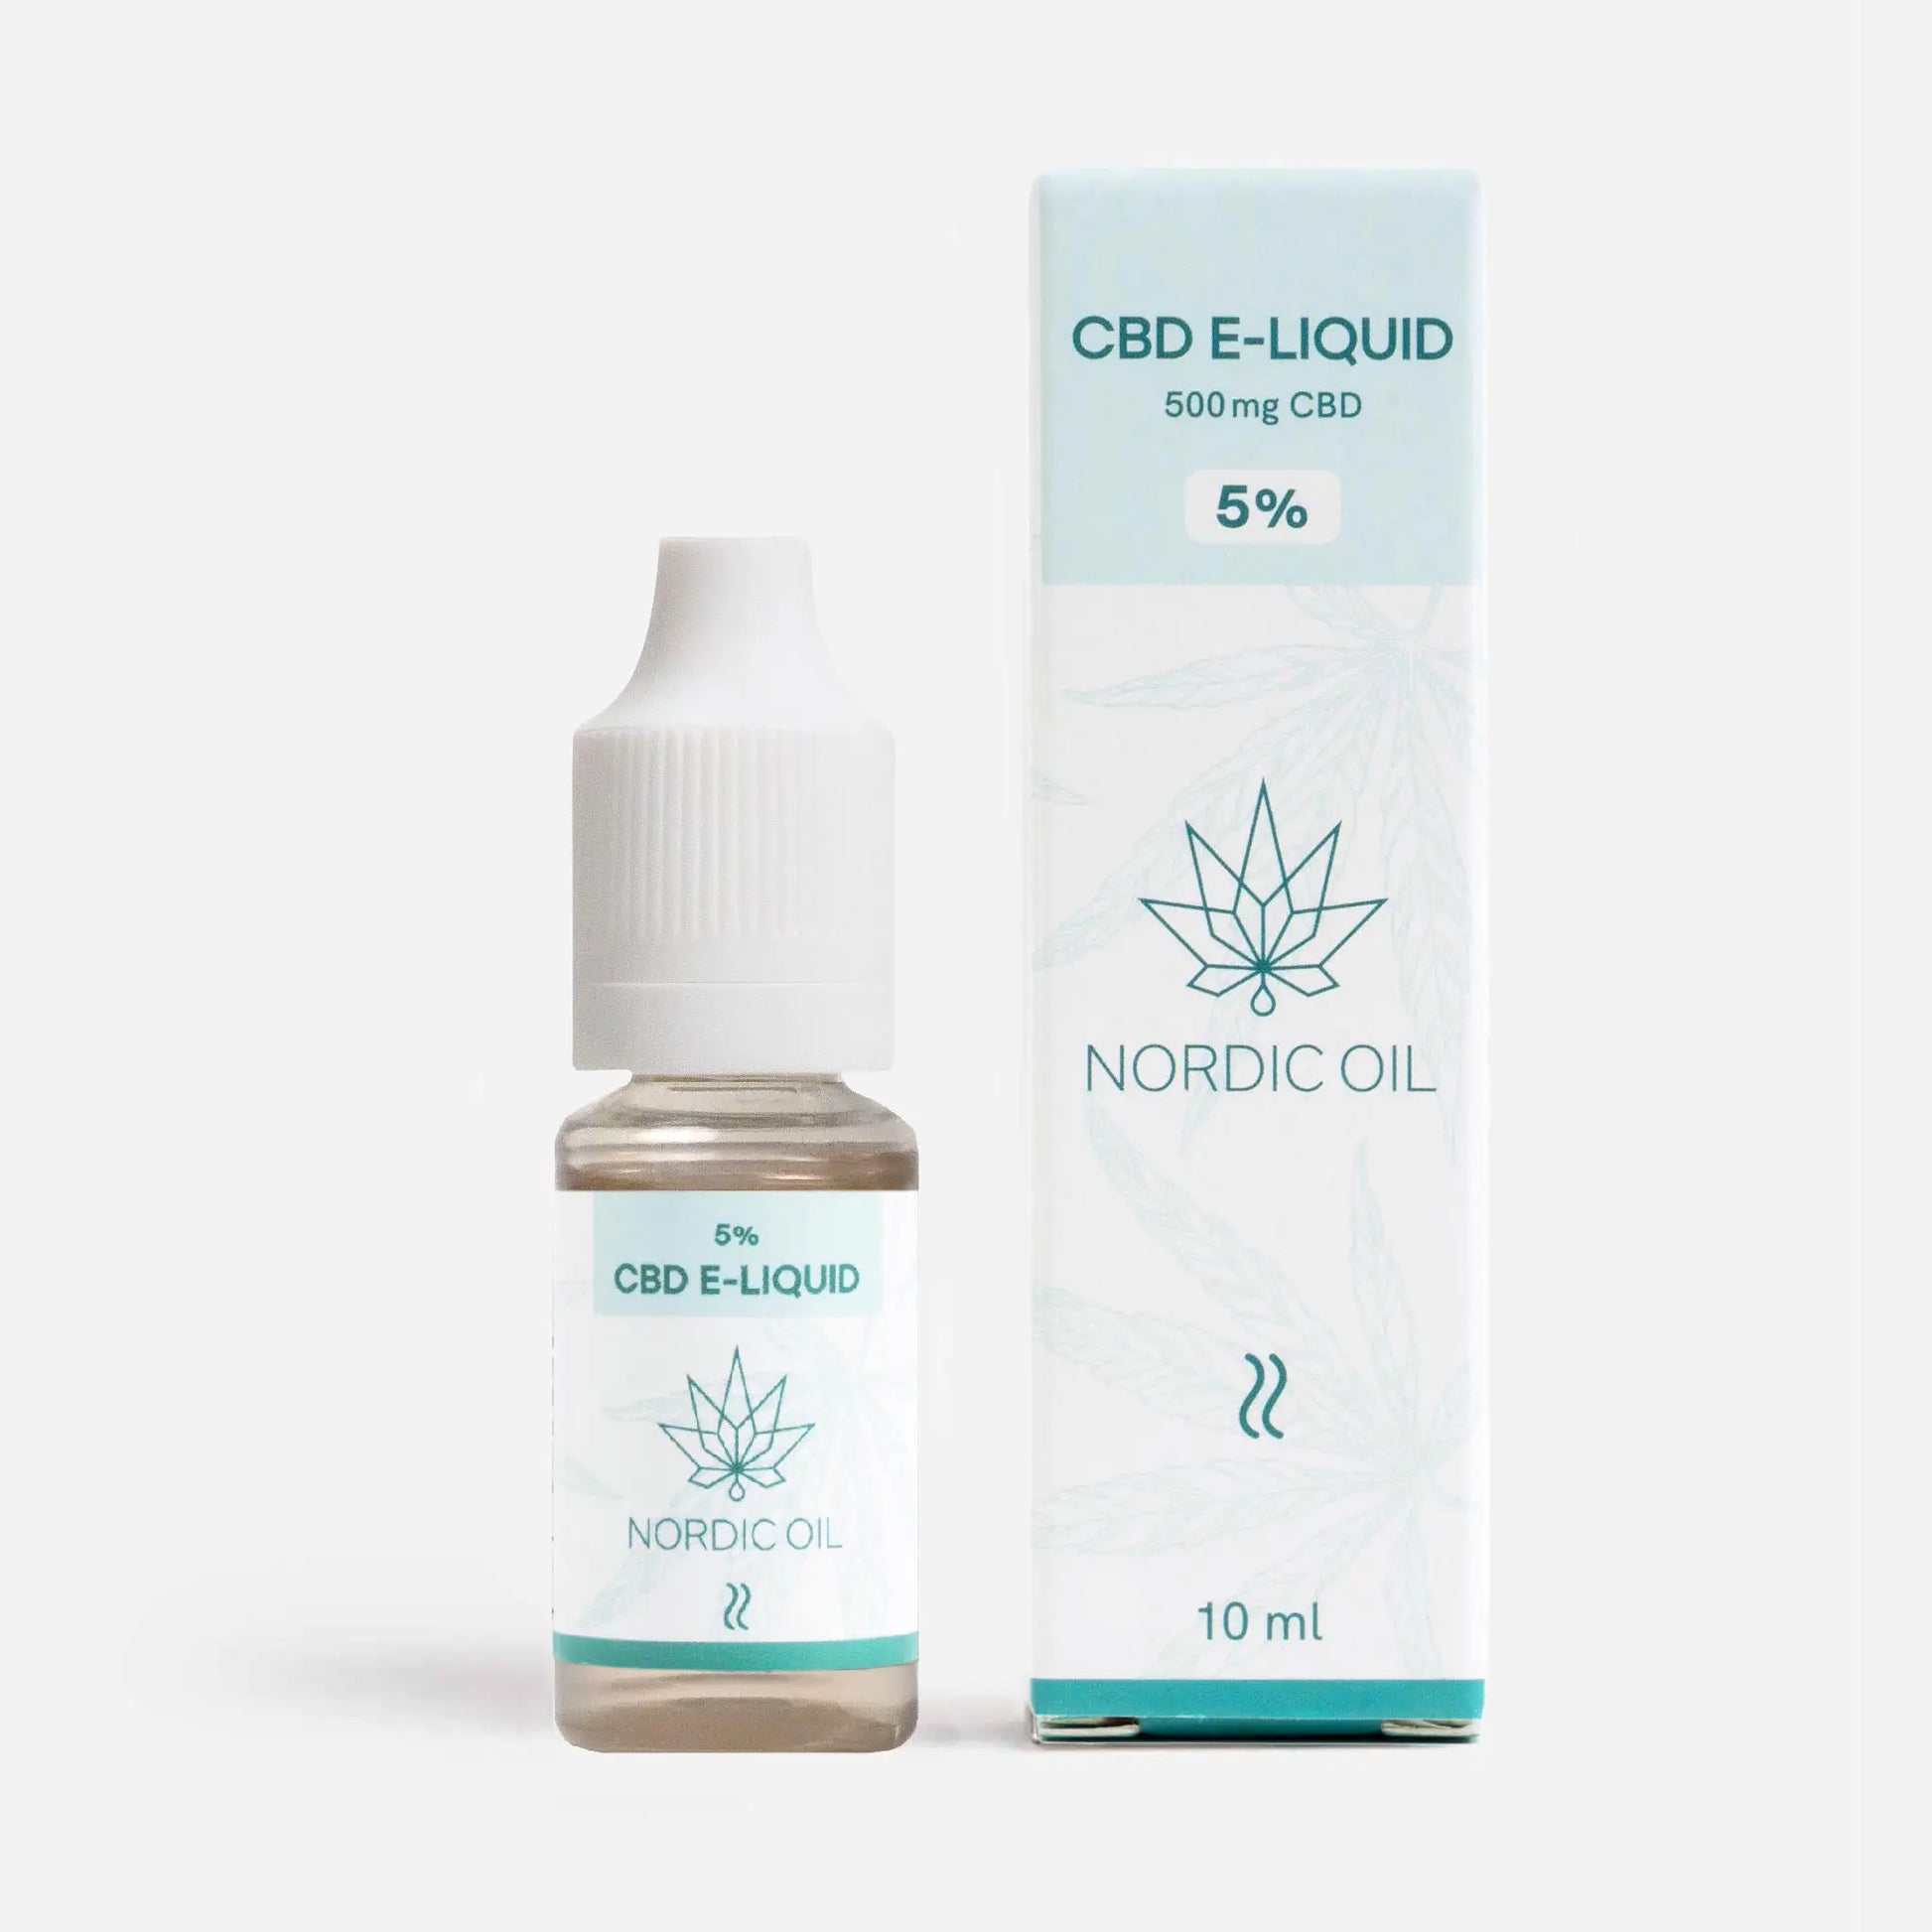 CBD E-Liquid (5%) from Nordic Oil beside the Packaging